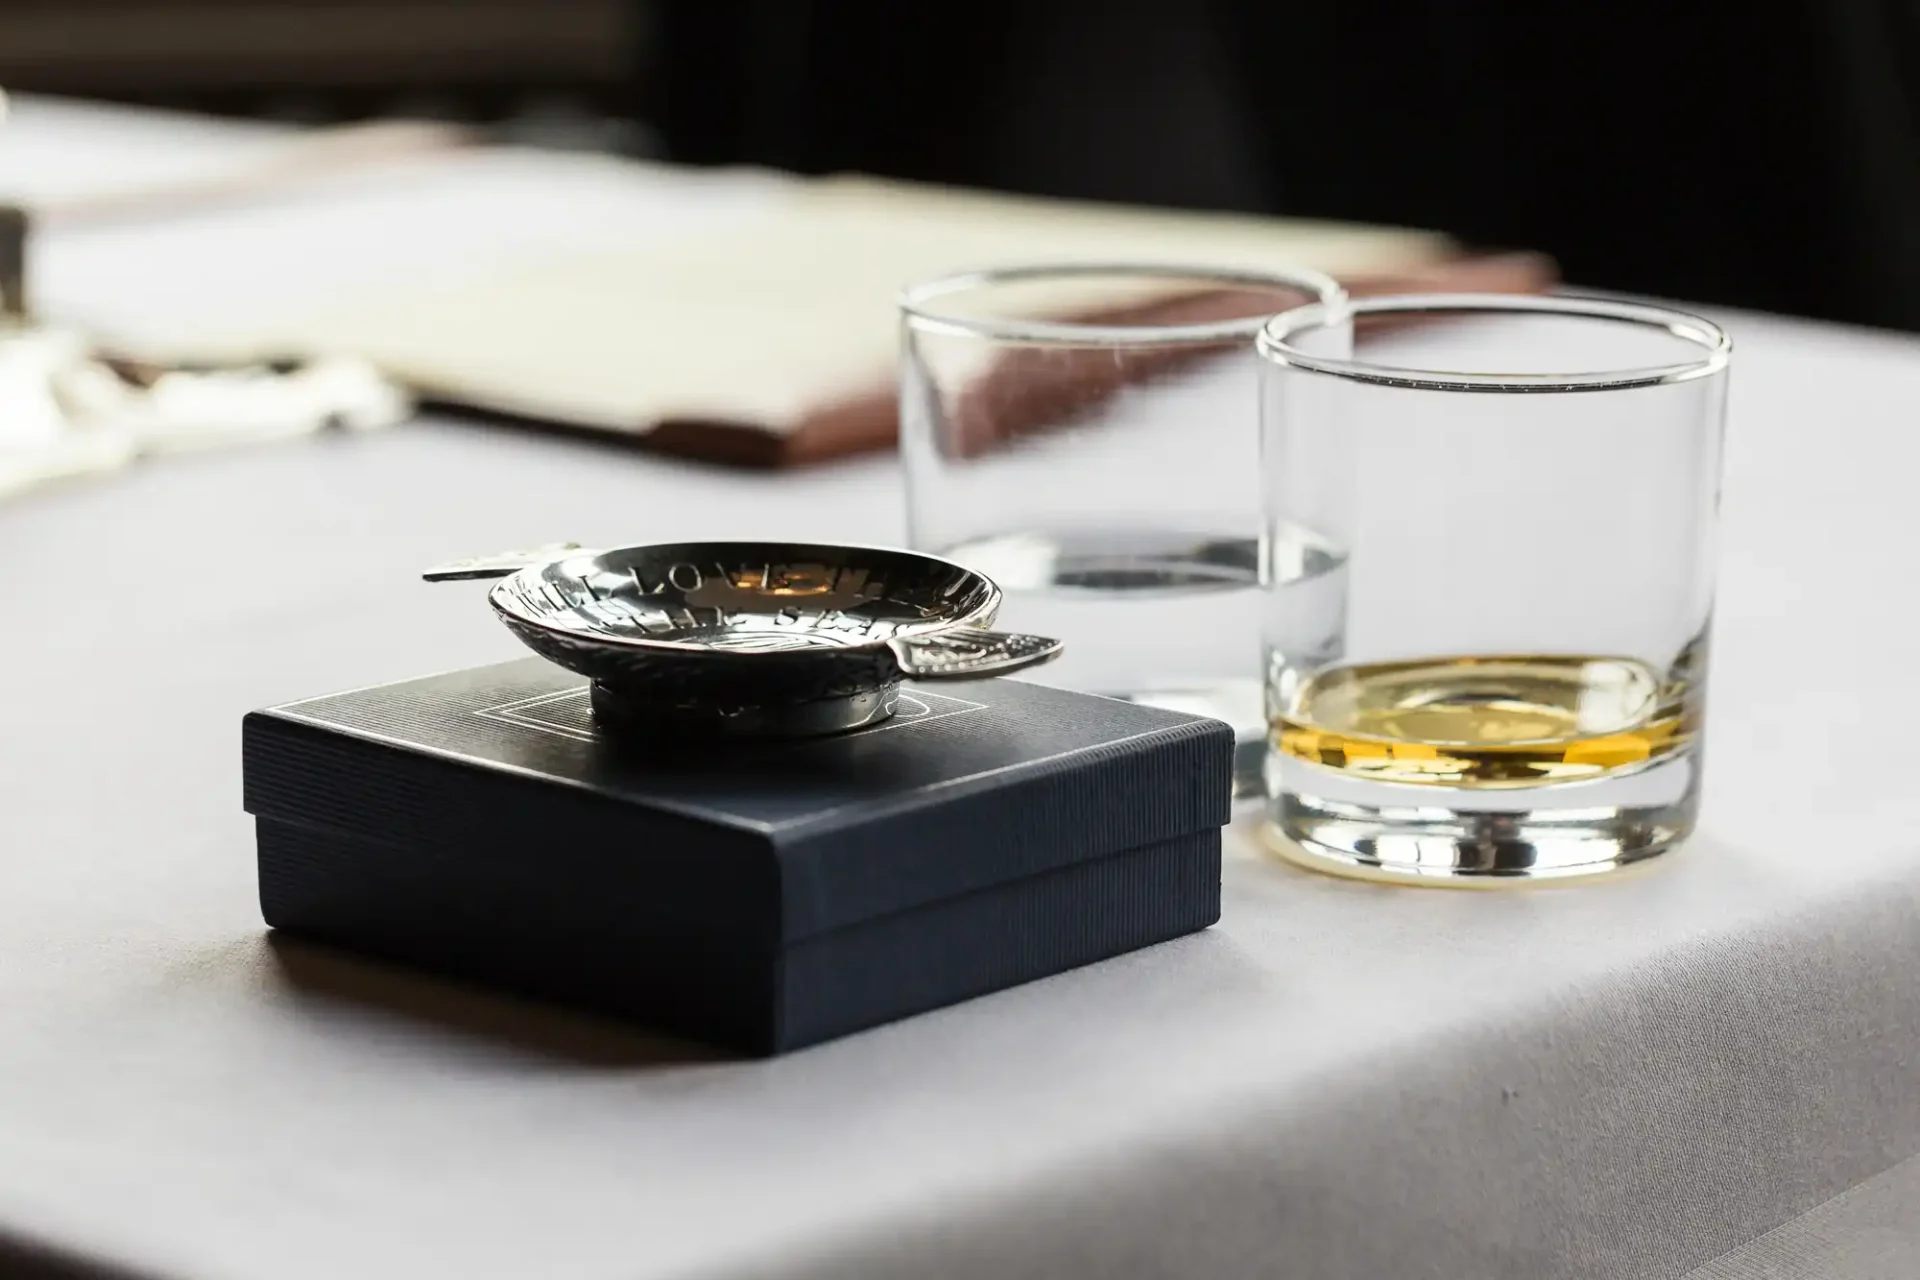 A close-up image of a table setting featuring an ashtray on a small box, and two glasses, one containing whiskey, in a restaurant.